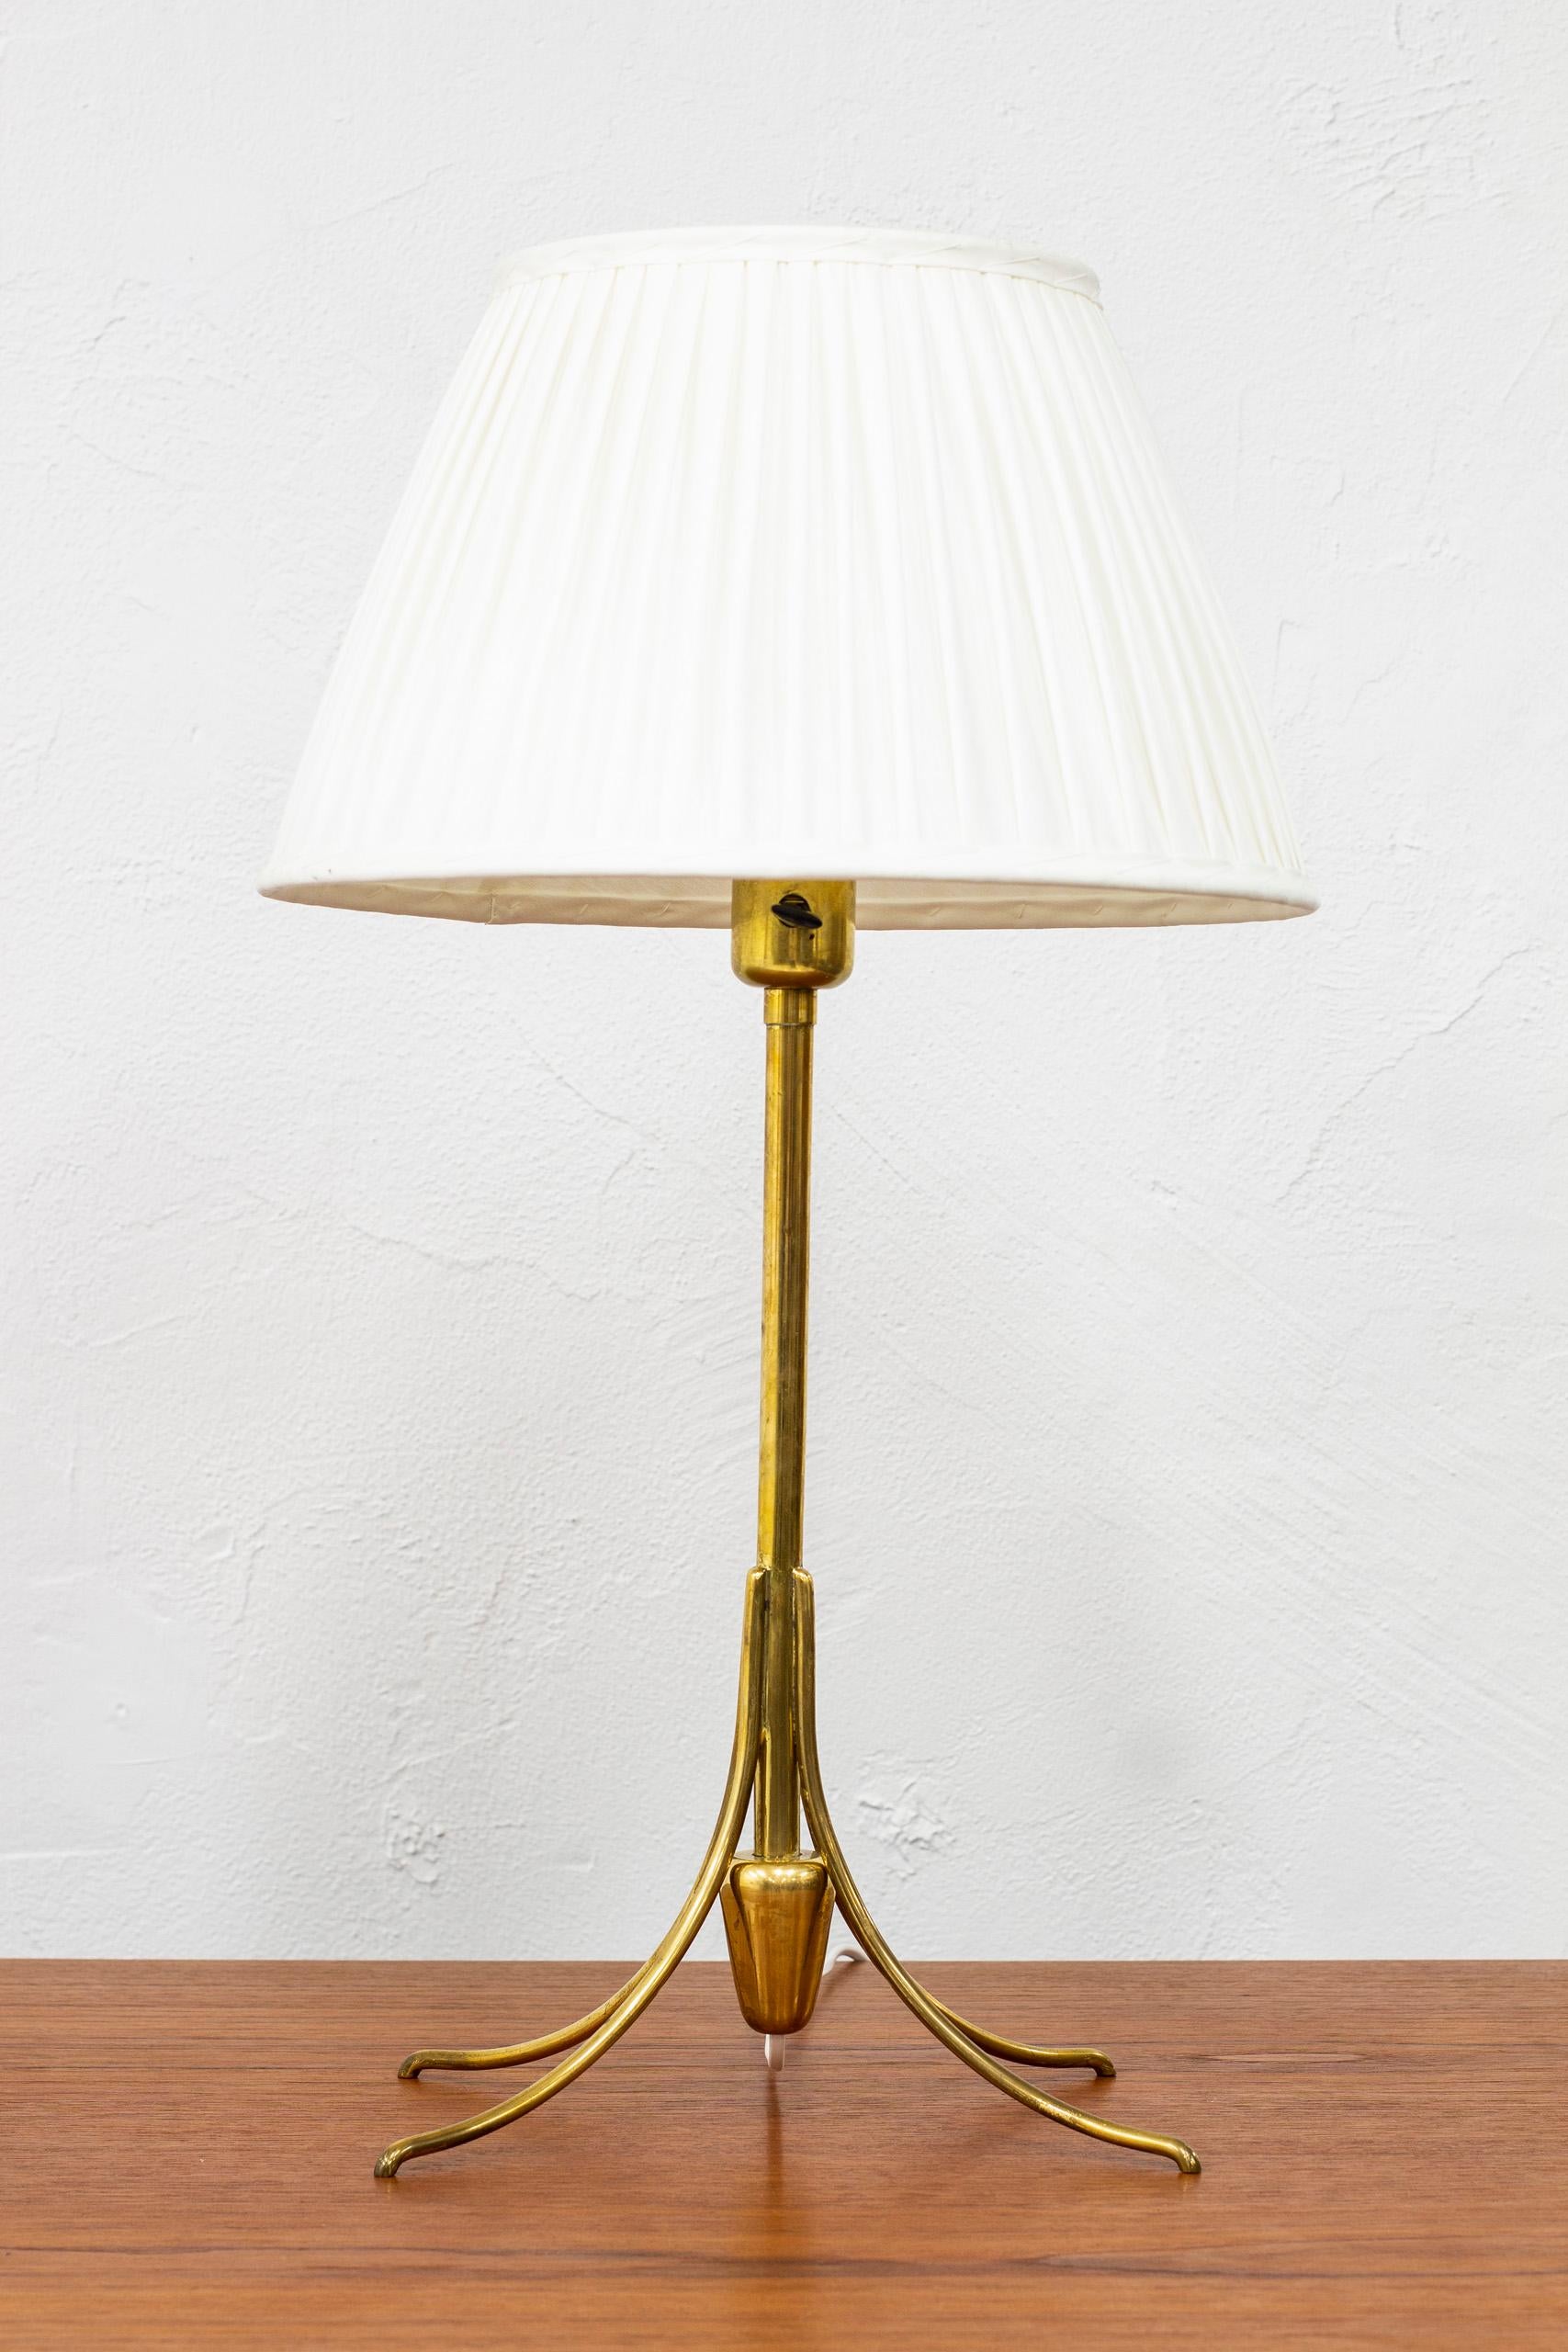 Rare table lamp designed by Bertil Brisborg. Produced by Nordiska Kompaniet during the 1940s. Made from solid polished brass. With new lamp shade upholstered with cream colored chintz fabric. Turning light switch on the lamp in working order. Very